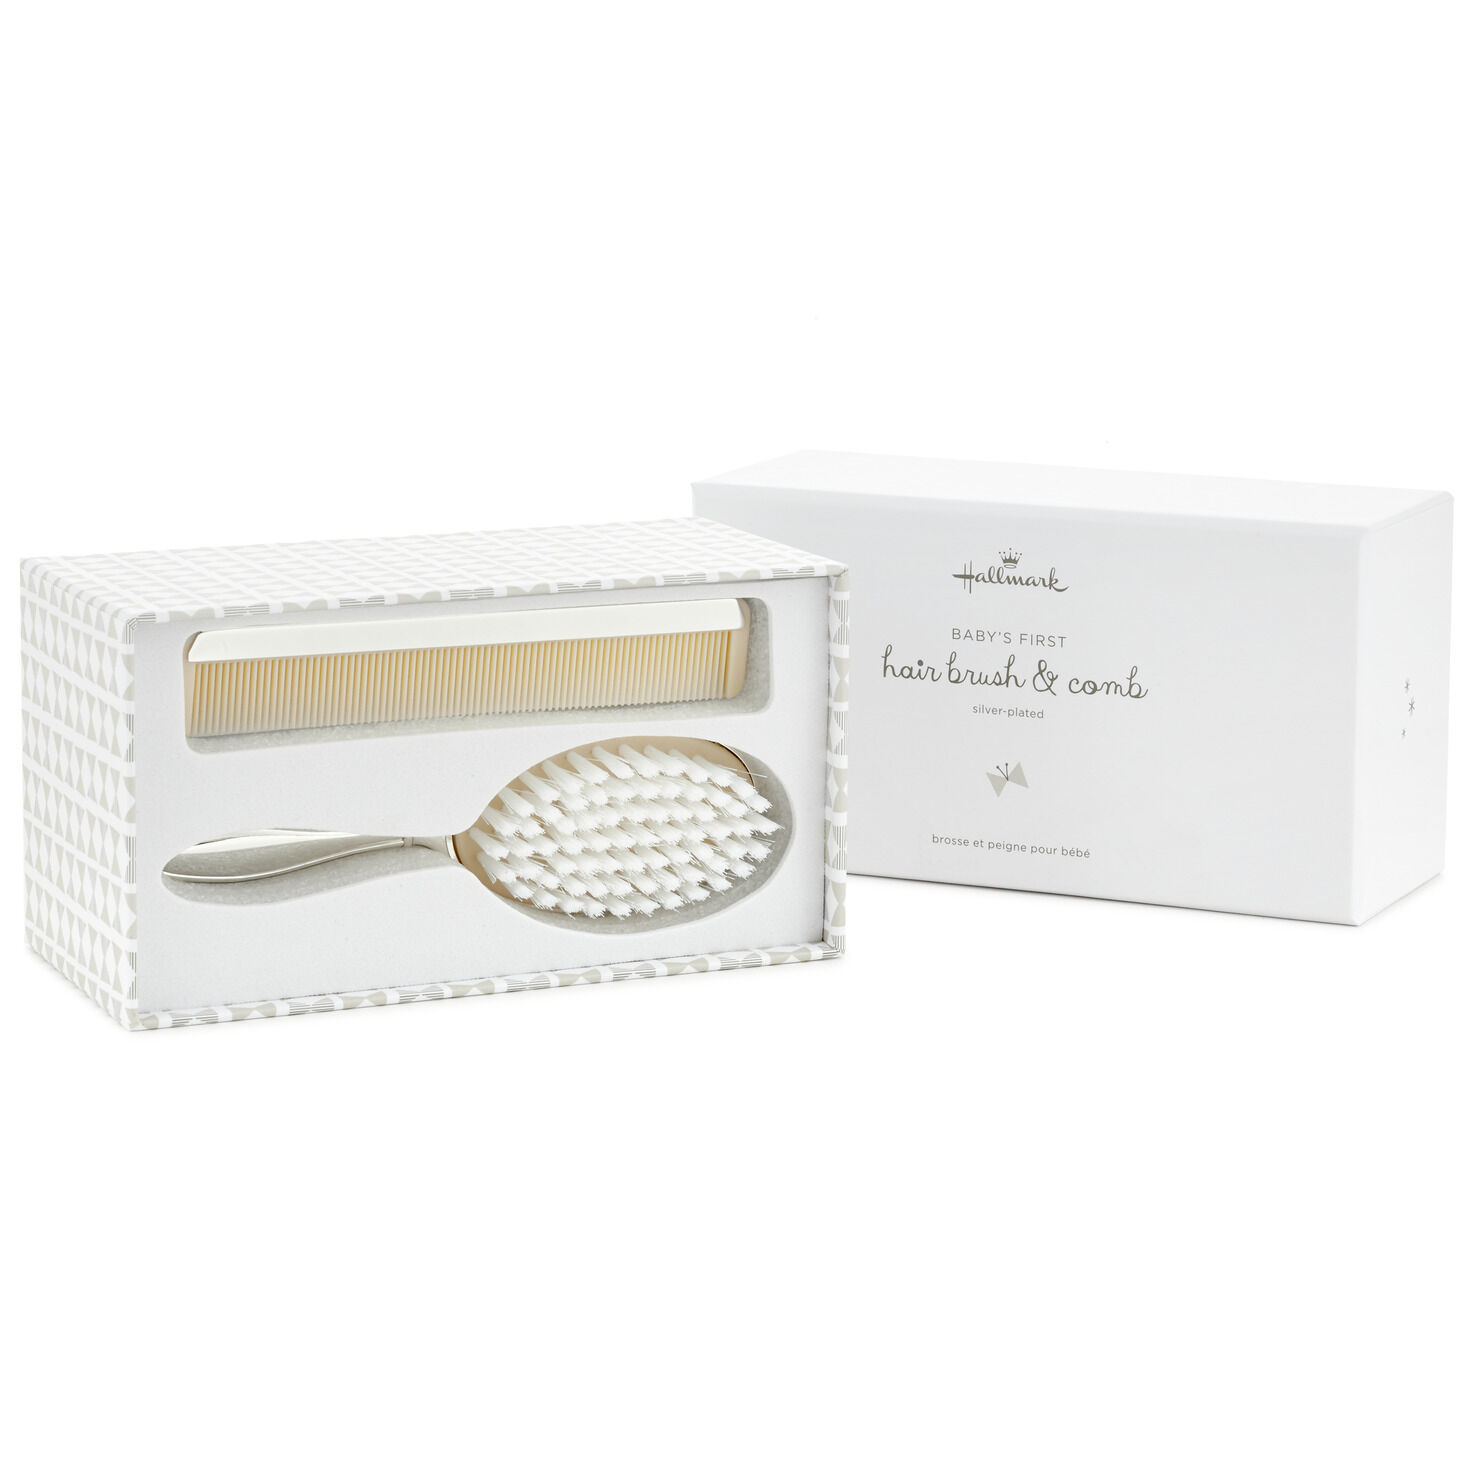 Baby's First Hair Brush and Comb, Set of 2 - Baby Essentials - Hallmark